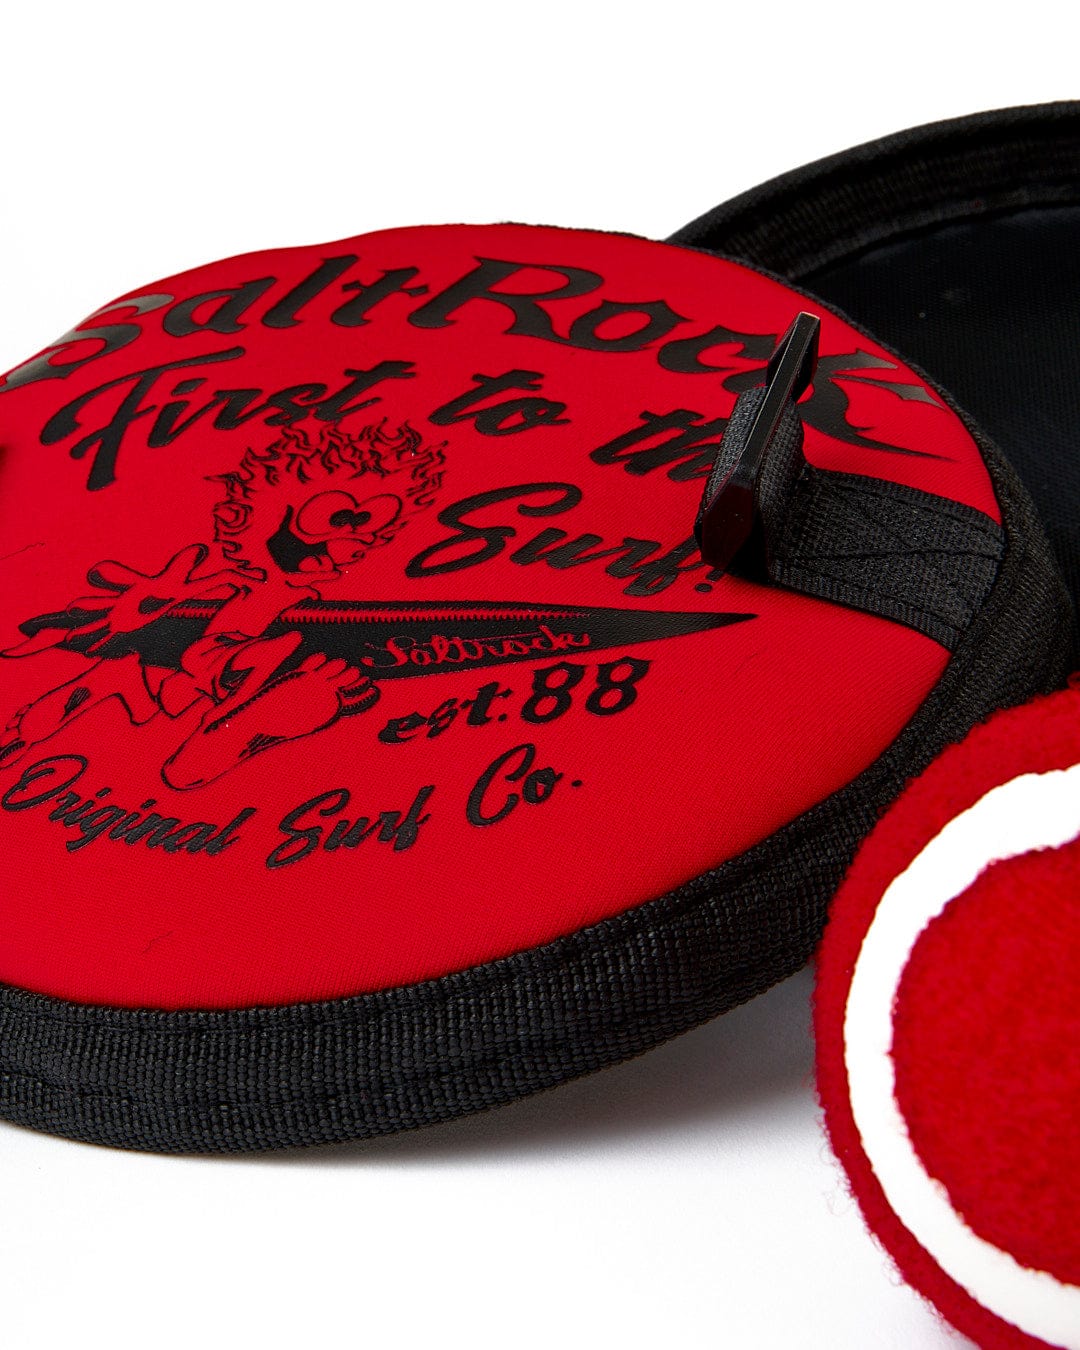 Two Jonty Catch Ball Sets - one in red and one in black, perfect for beach games by Saltrock.